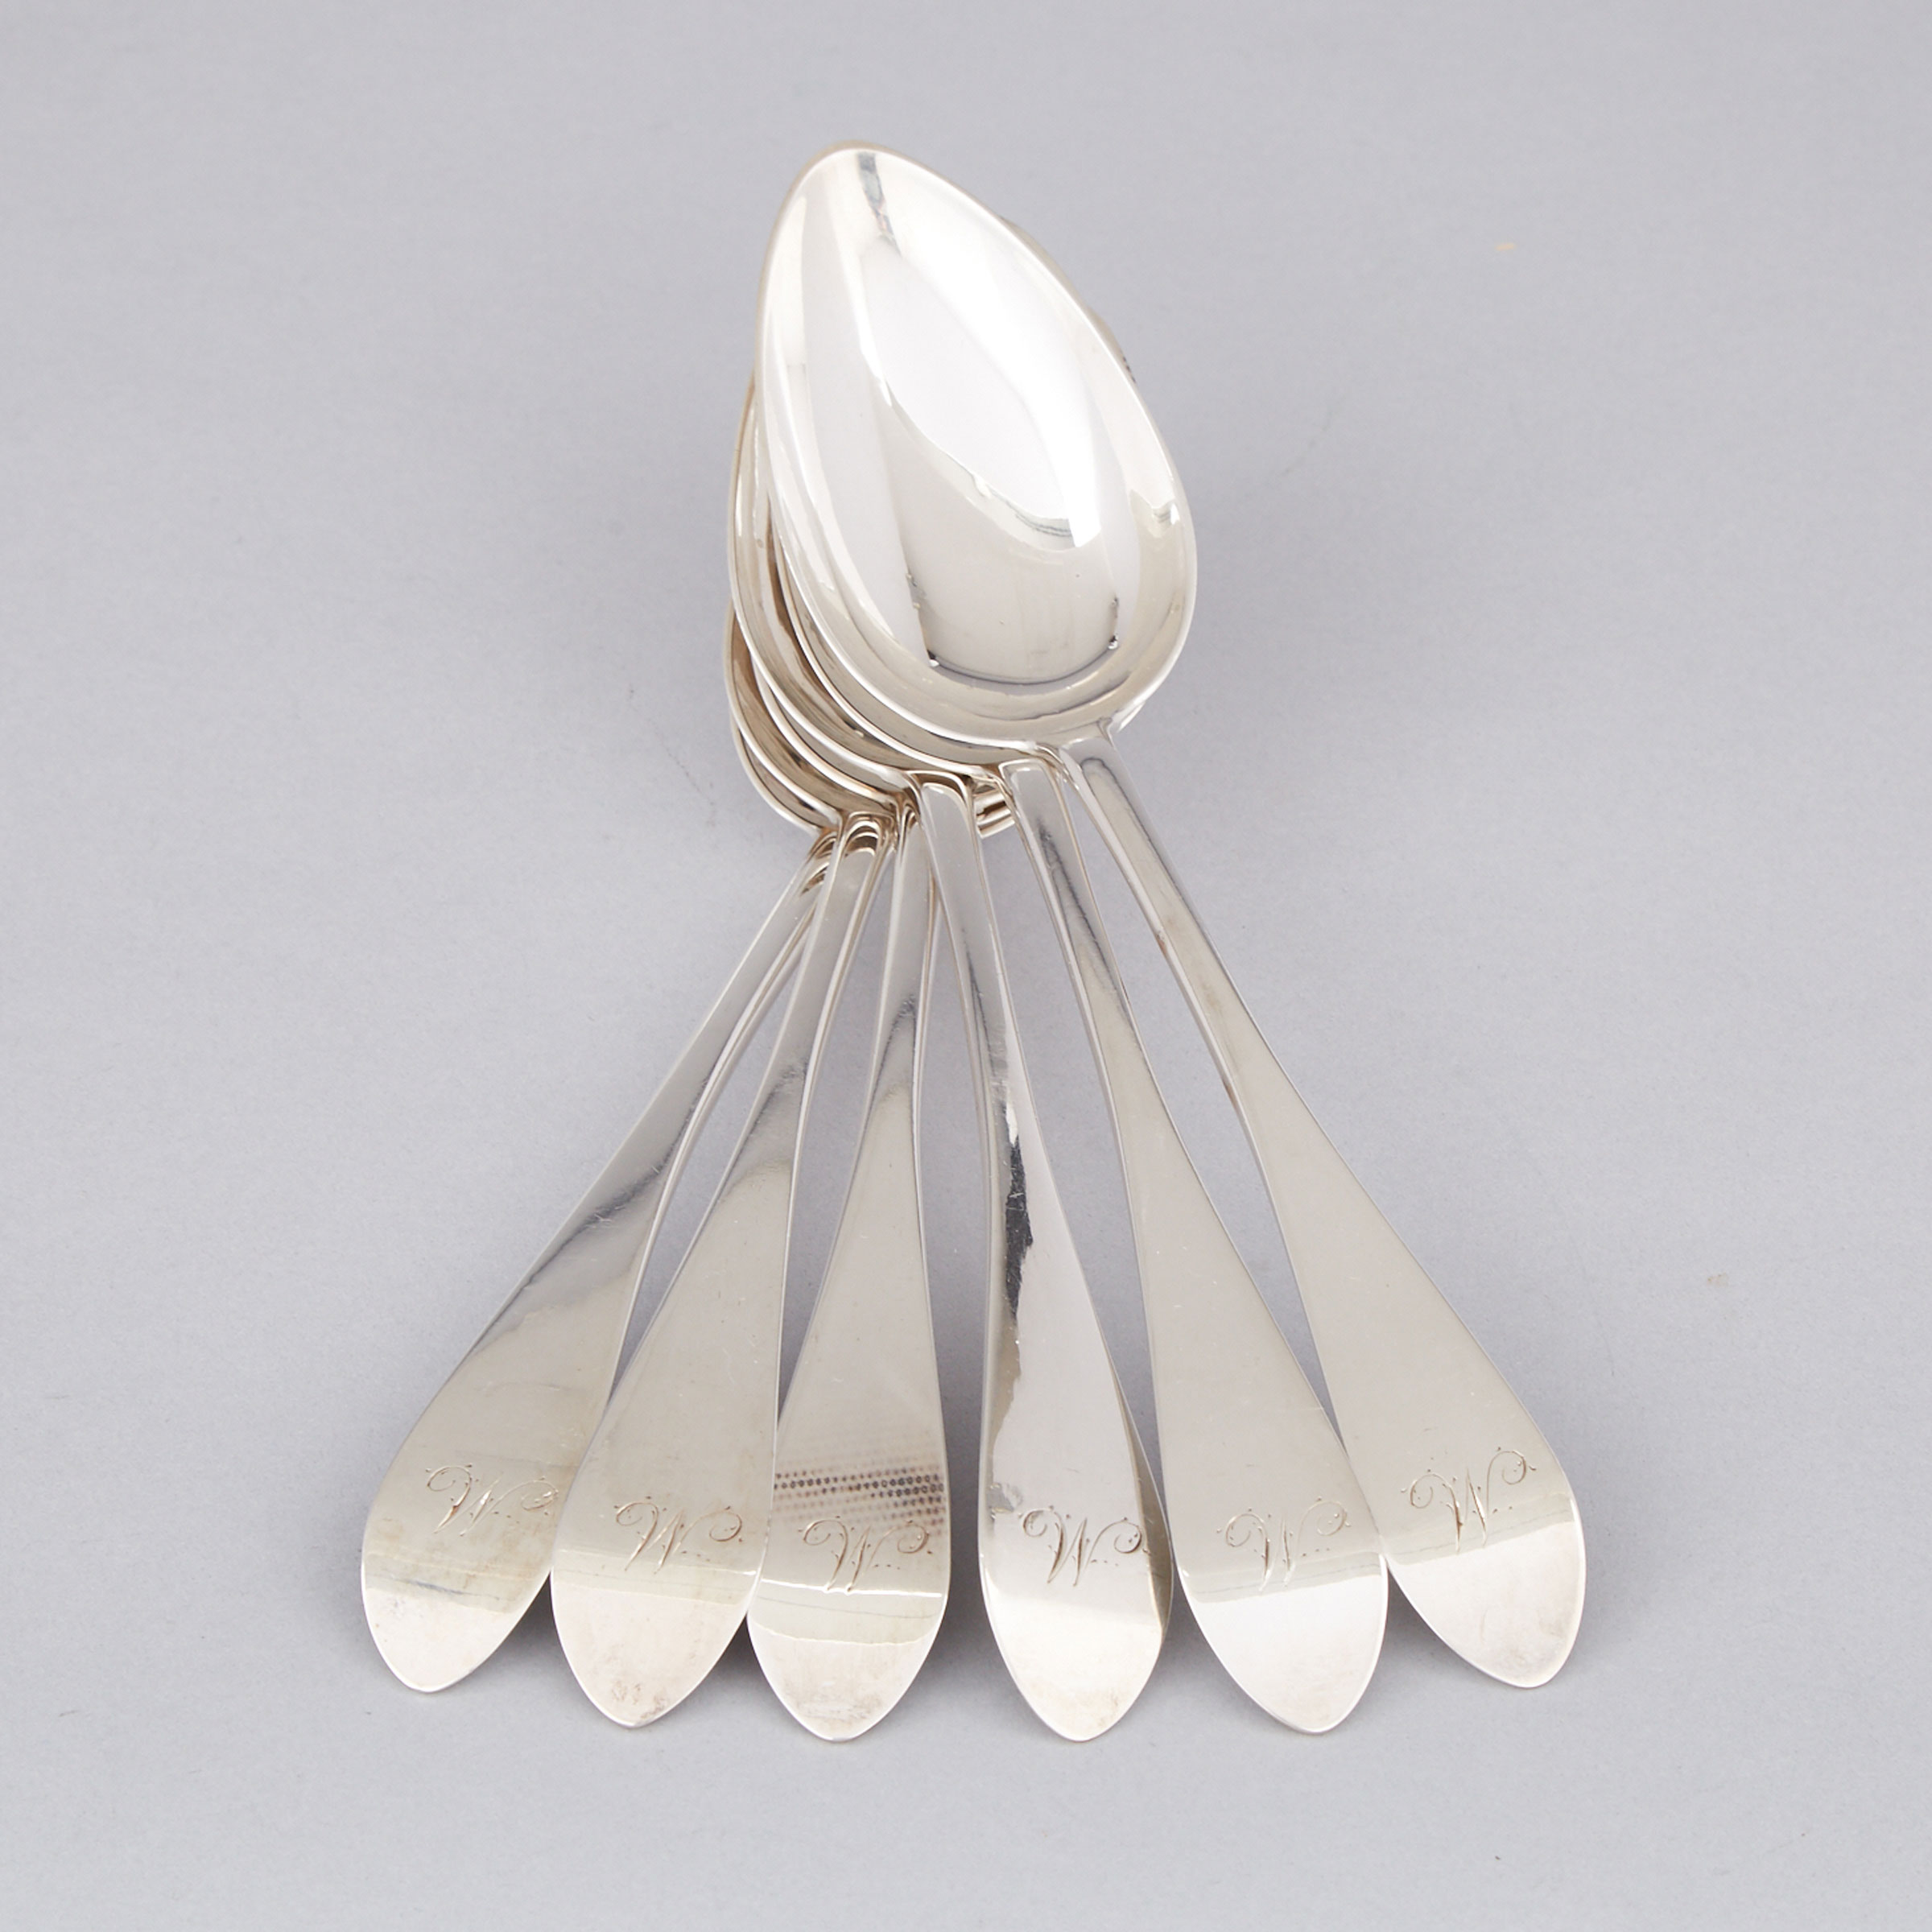 Six Scottish Provincial Silver Table Spoons, Edward Livingstone, Dundee, c.1790-1800